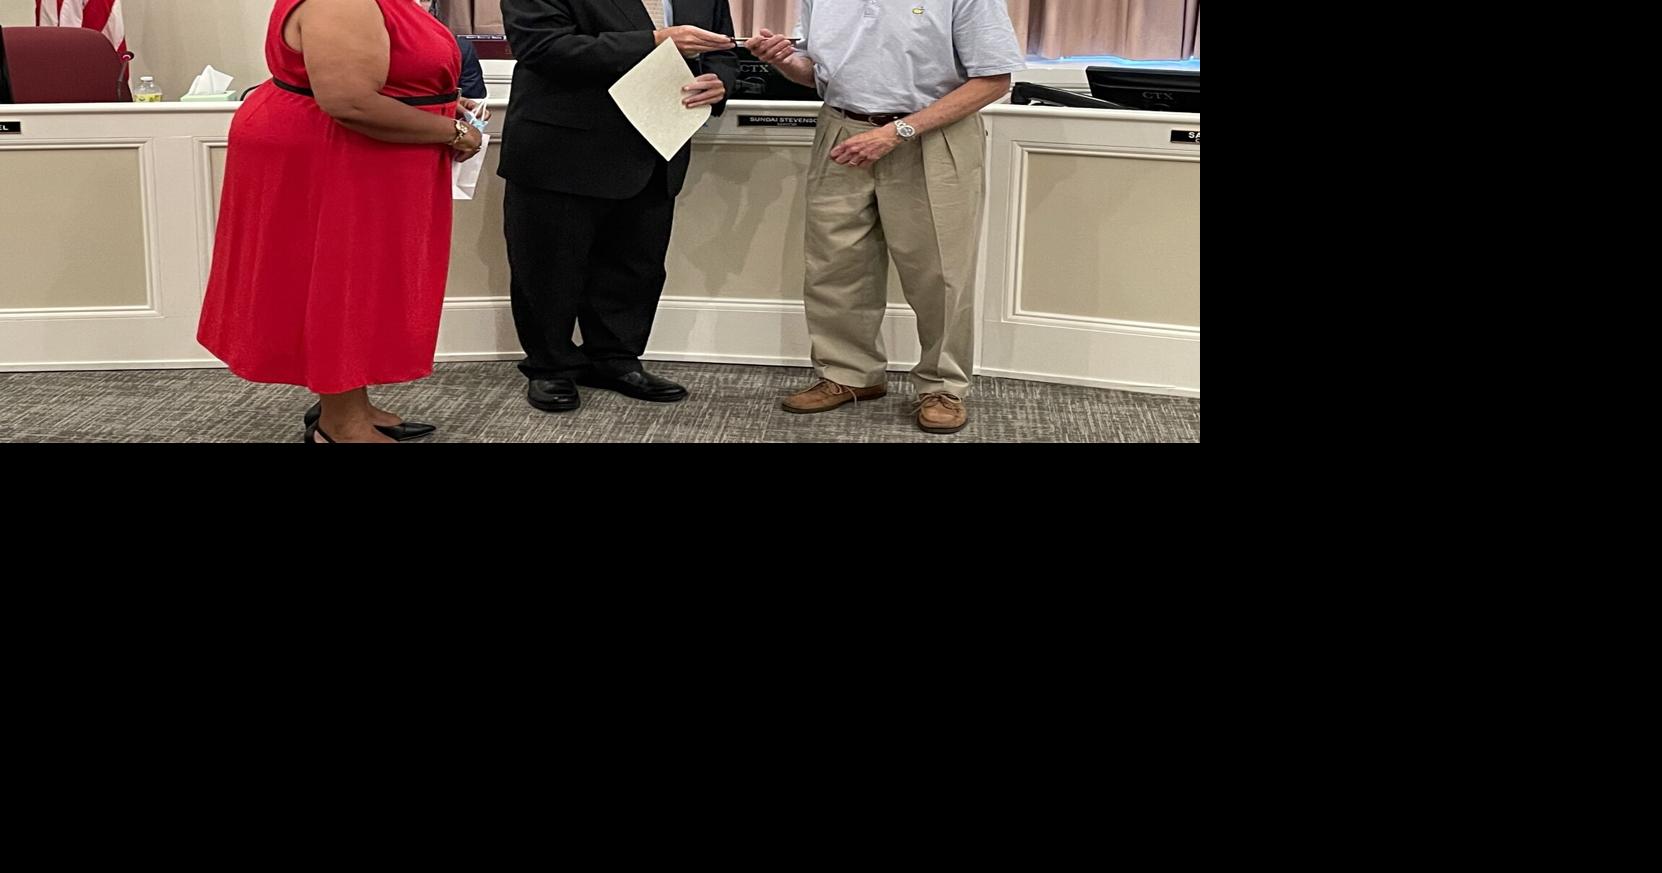 Rome City Commission Awards Brooke Temple Key To The City Local News 